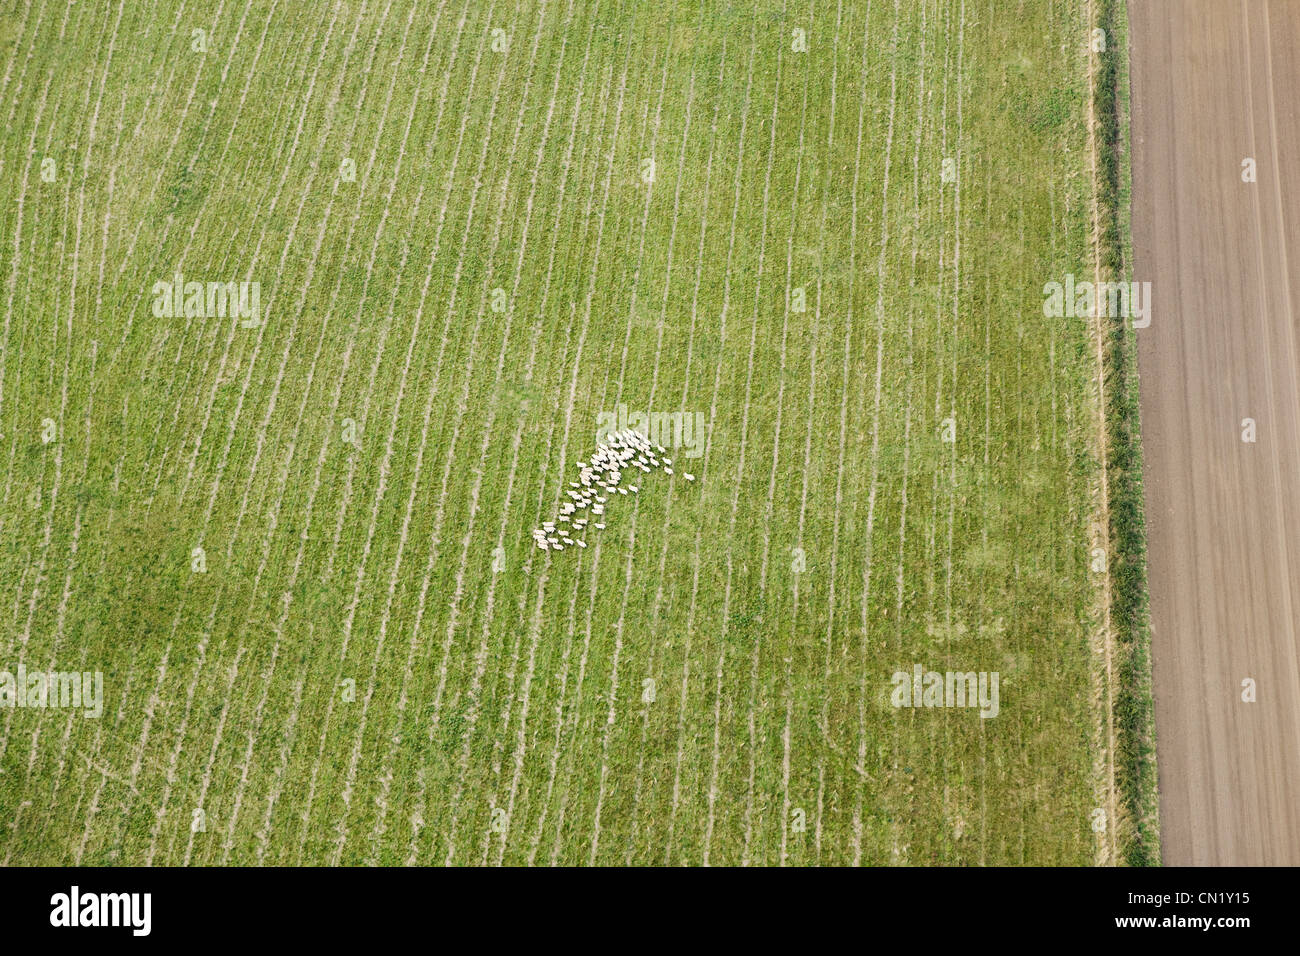 Aerial view of sheep in field, UK Stock Photo